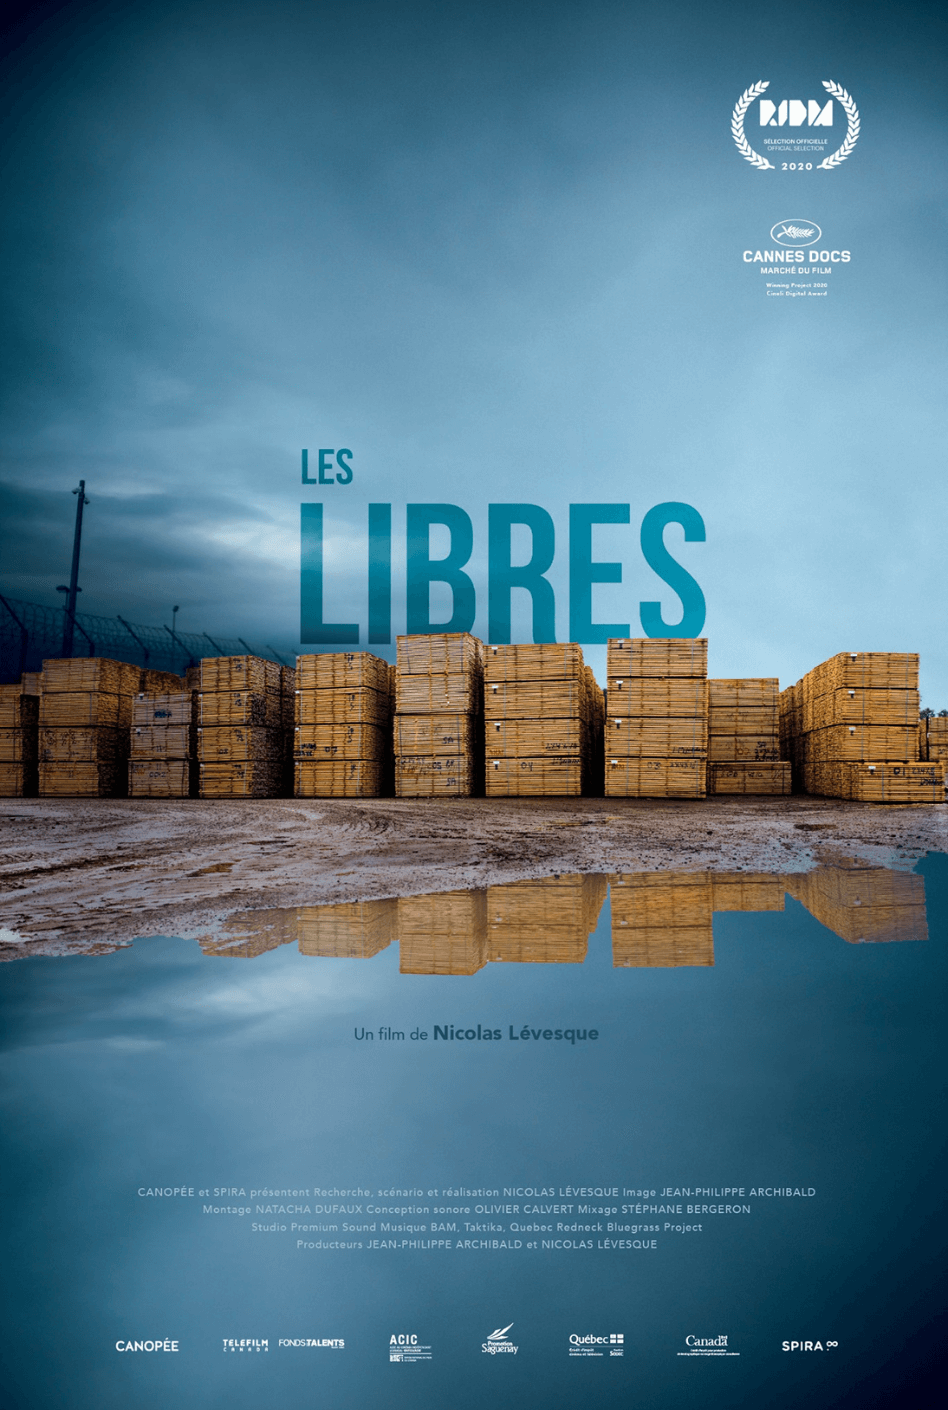 images/bottin_films/4125f4dccc90ade834f3676c5dd8f470-Les-libres-affiche-poster.png#joomlaImage://local-images/bottin_films/4125f4dccc90ade834f3676c5dd8f470-Les-libres-affiche-poster.png?width=948&height=1410